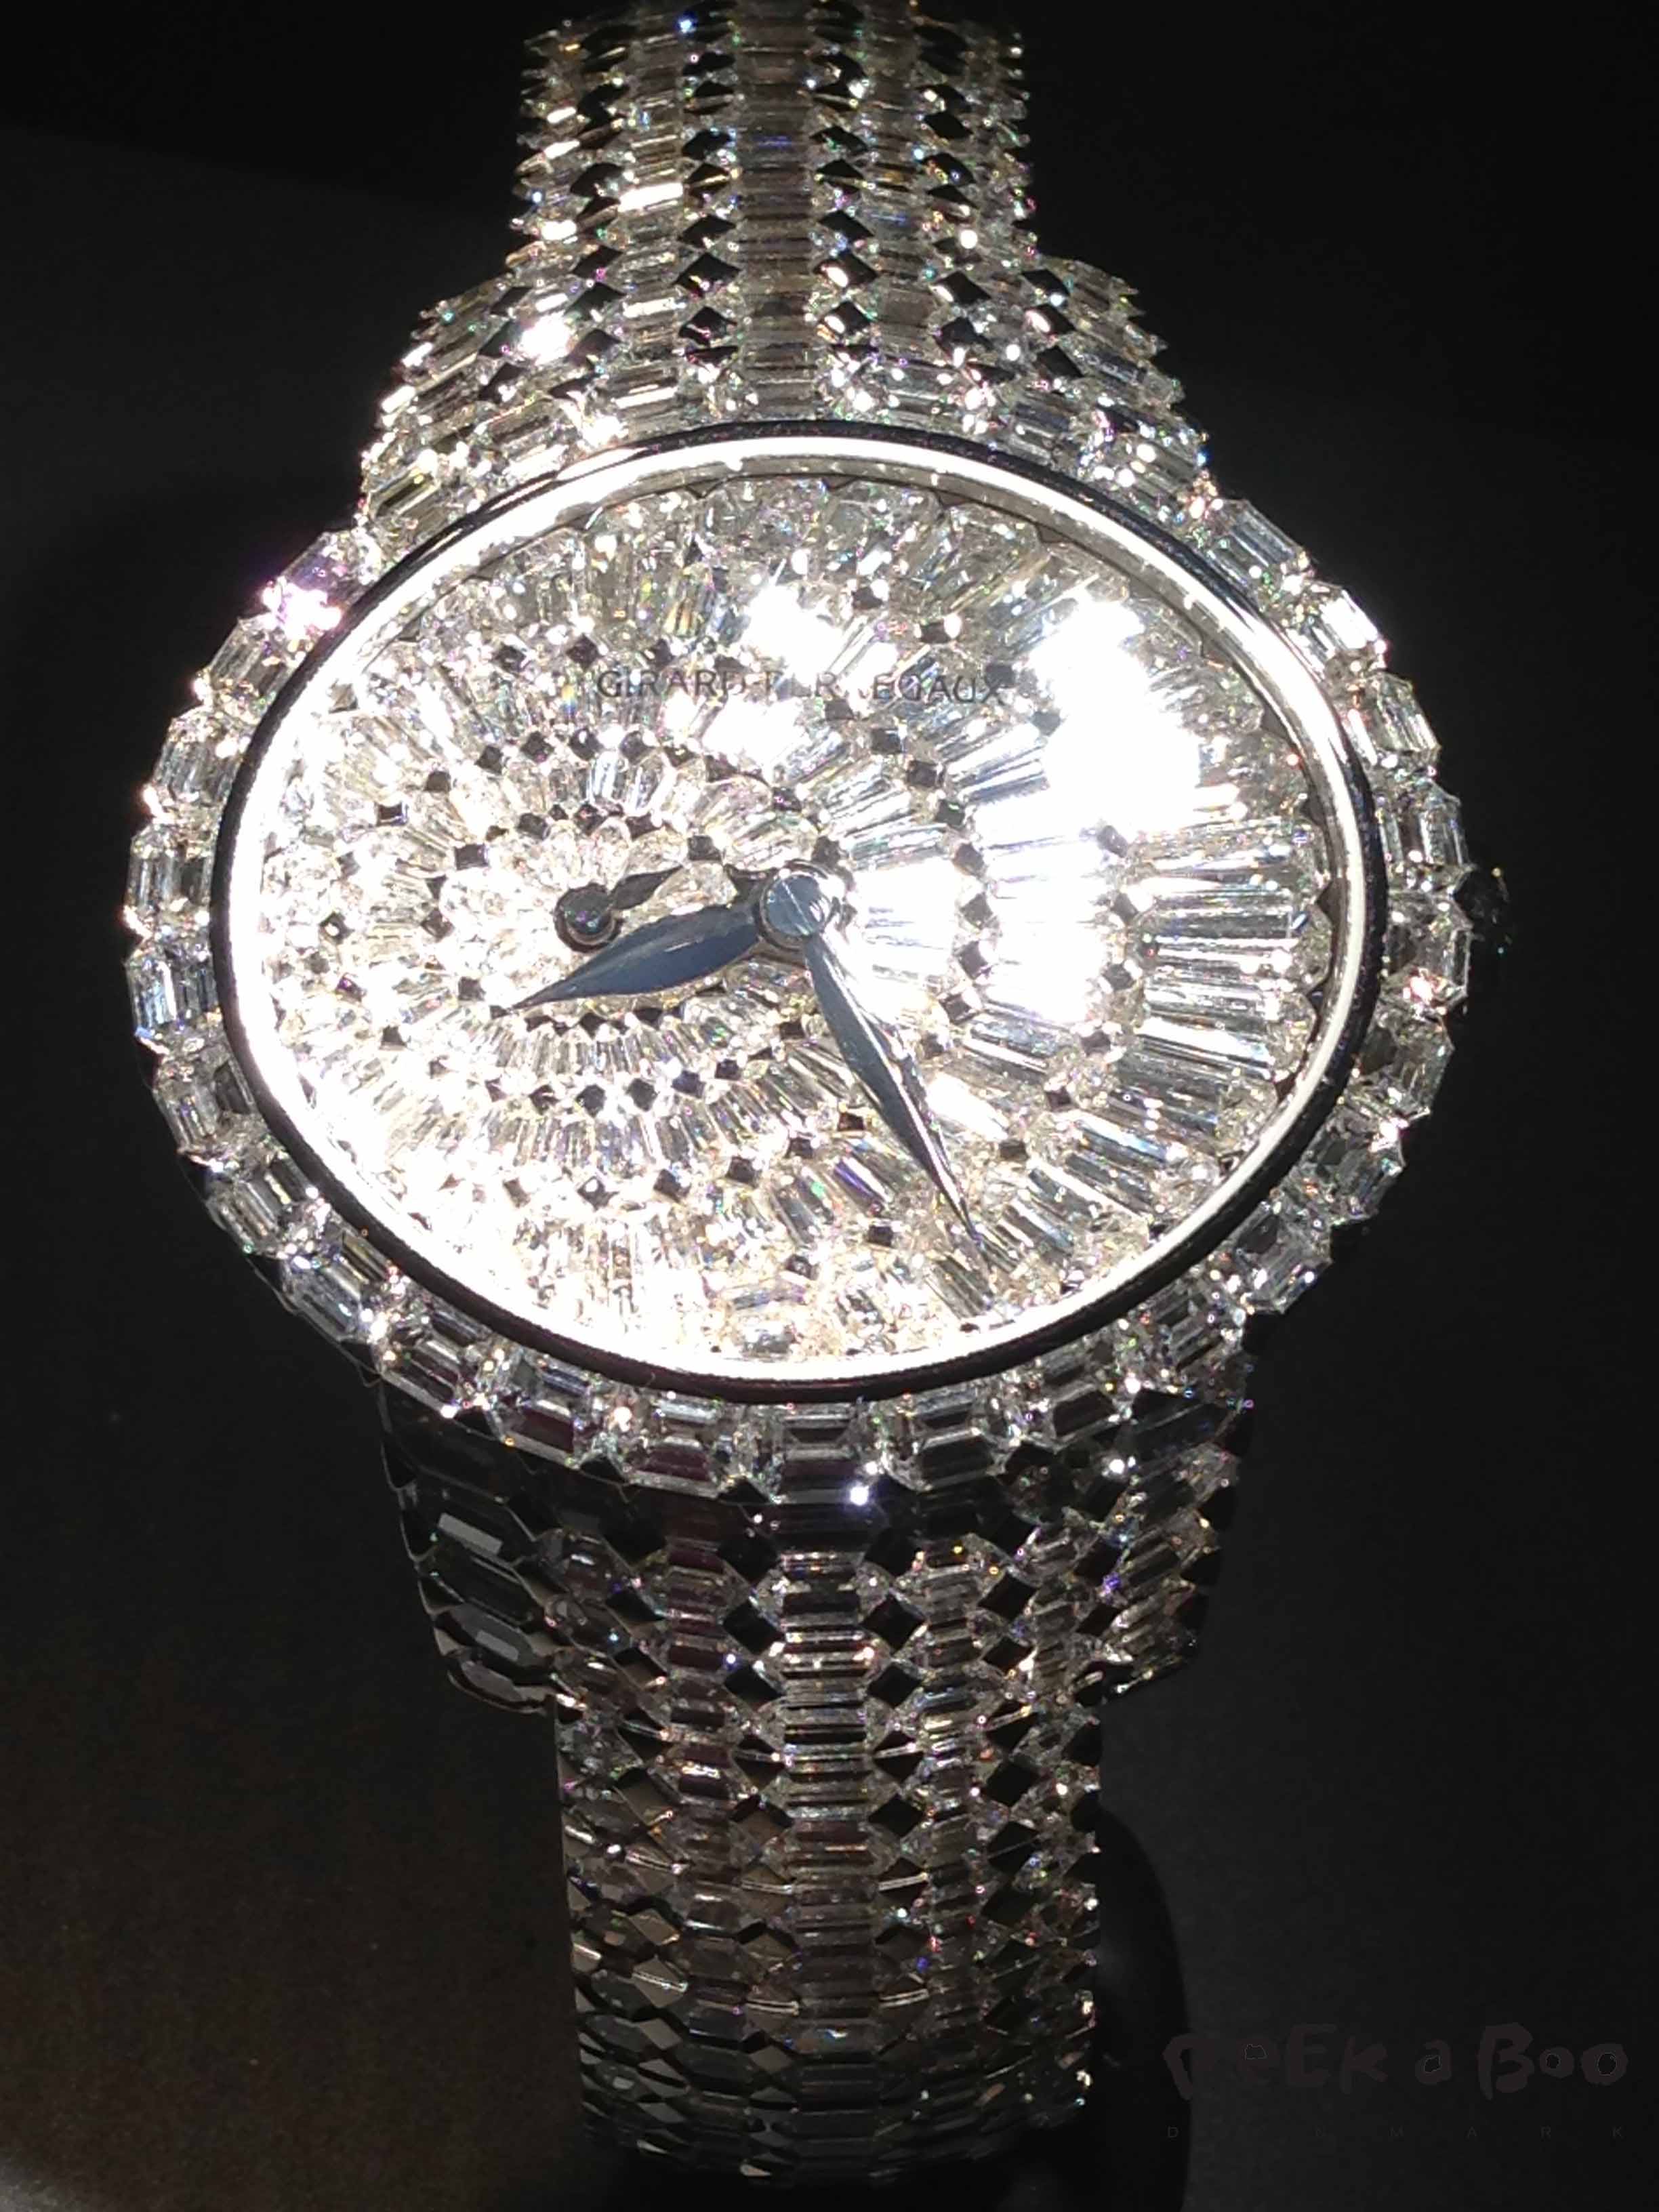 Cateye Collection from Gerard Perregaux with only White diamonds. 